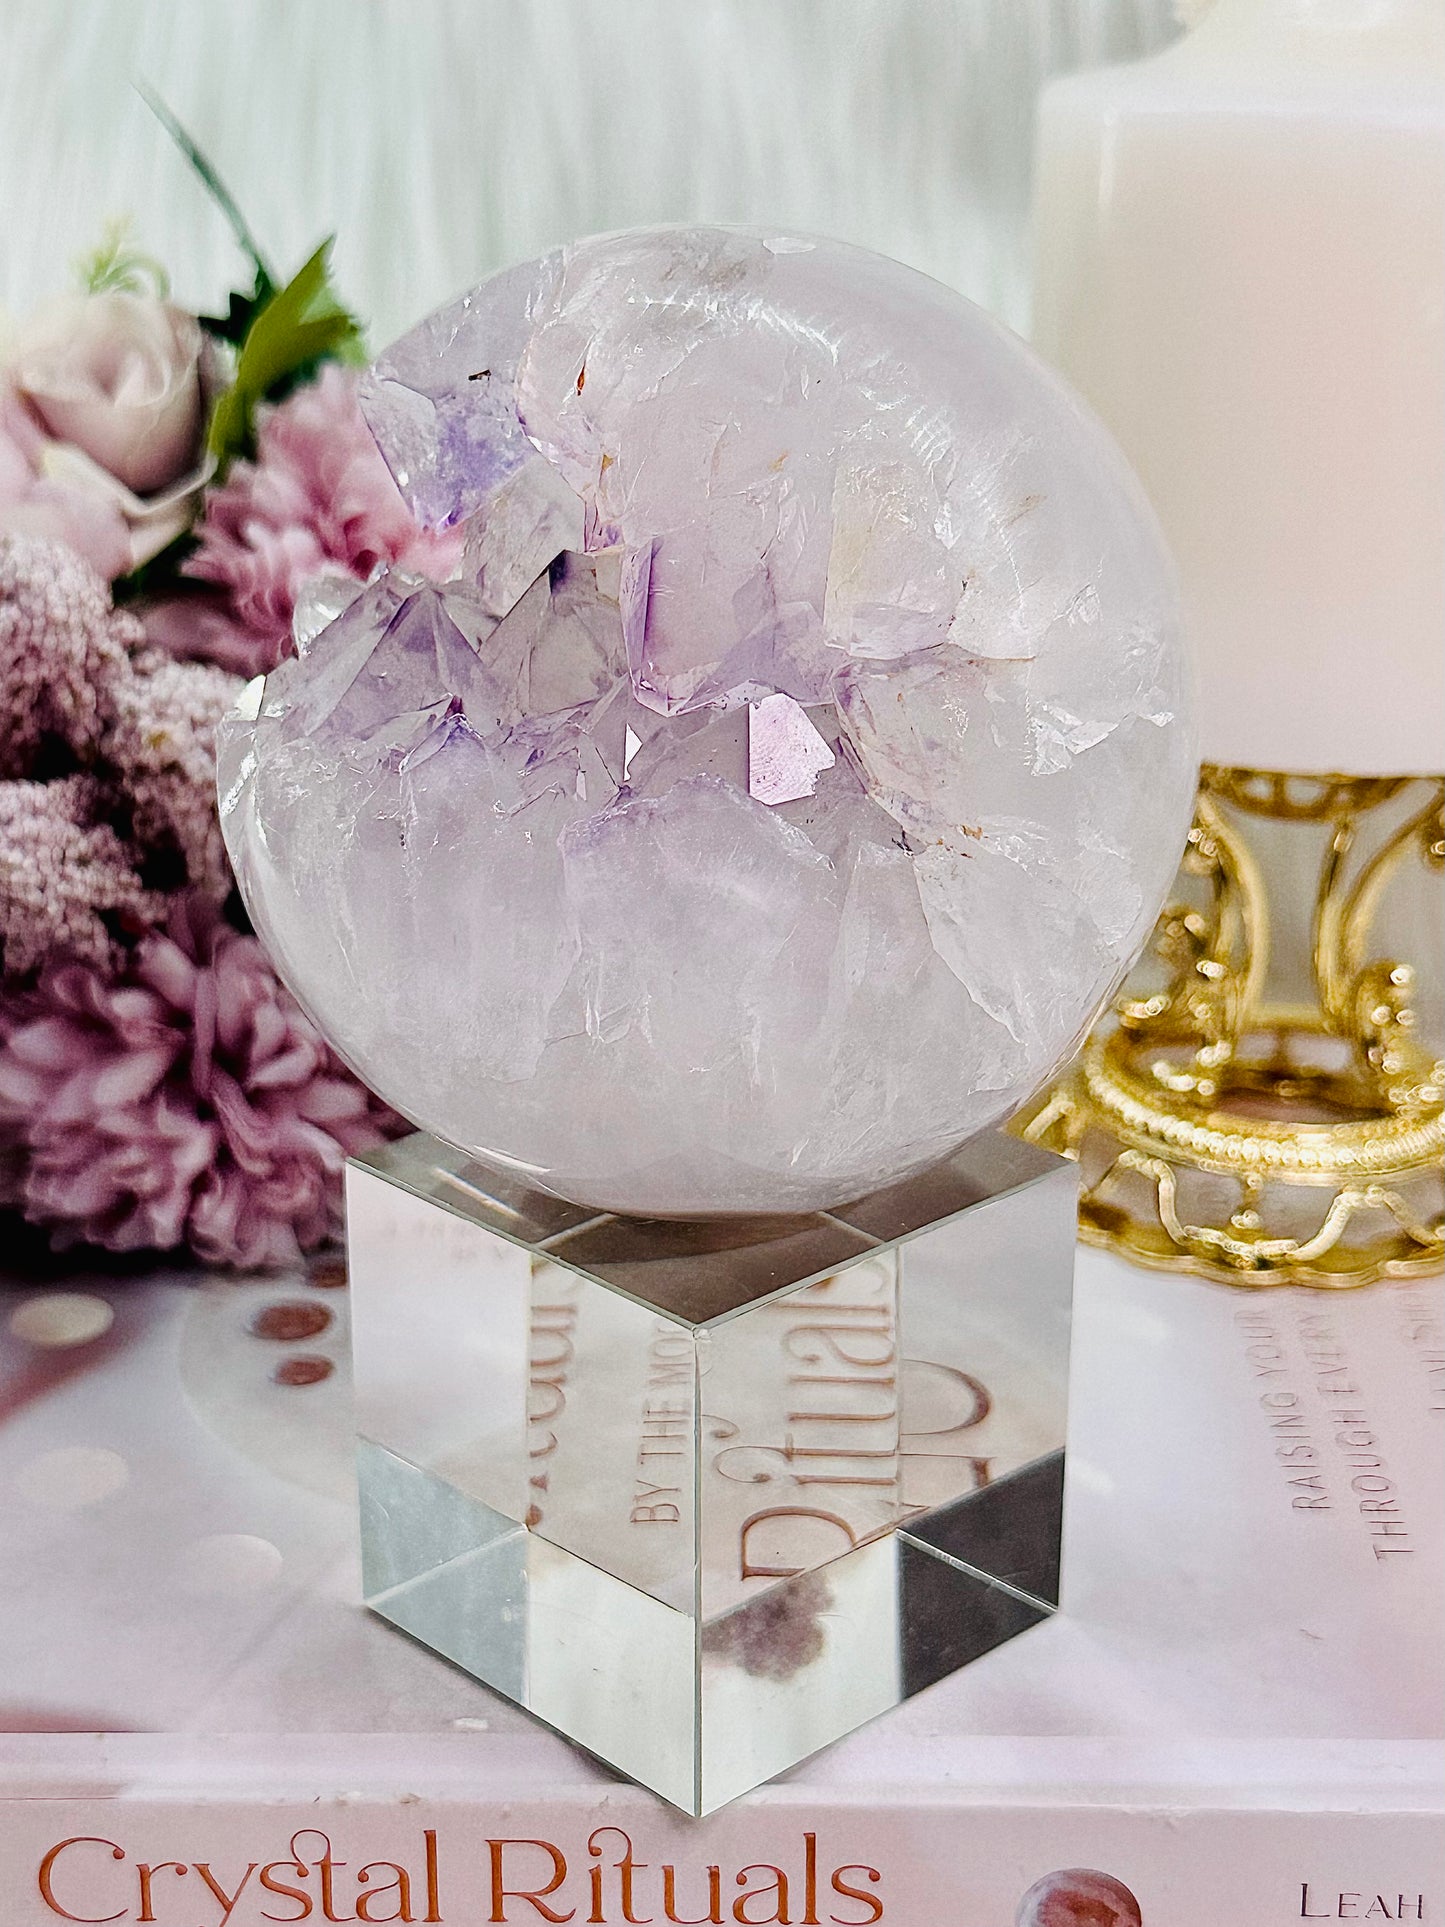 ⚜️ SALE ⚜️Elegant & Divine Large 861gram Druzy Amethyst In Quartz Sphere On Silver Stand (stand in pic is display only) Absolutely Stunning Piece